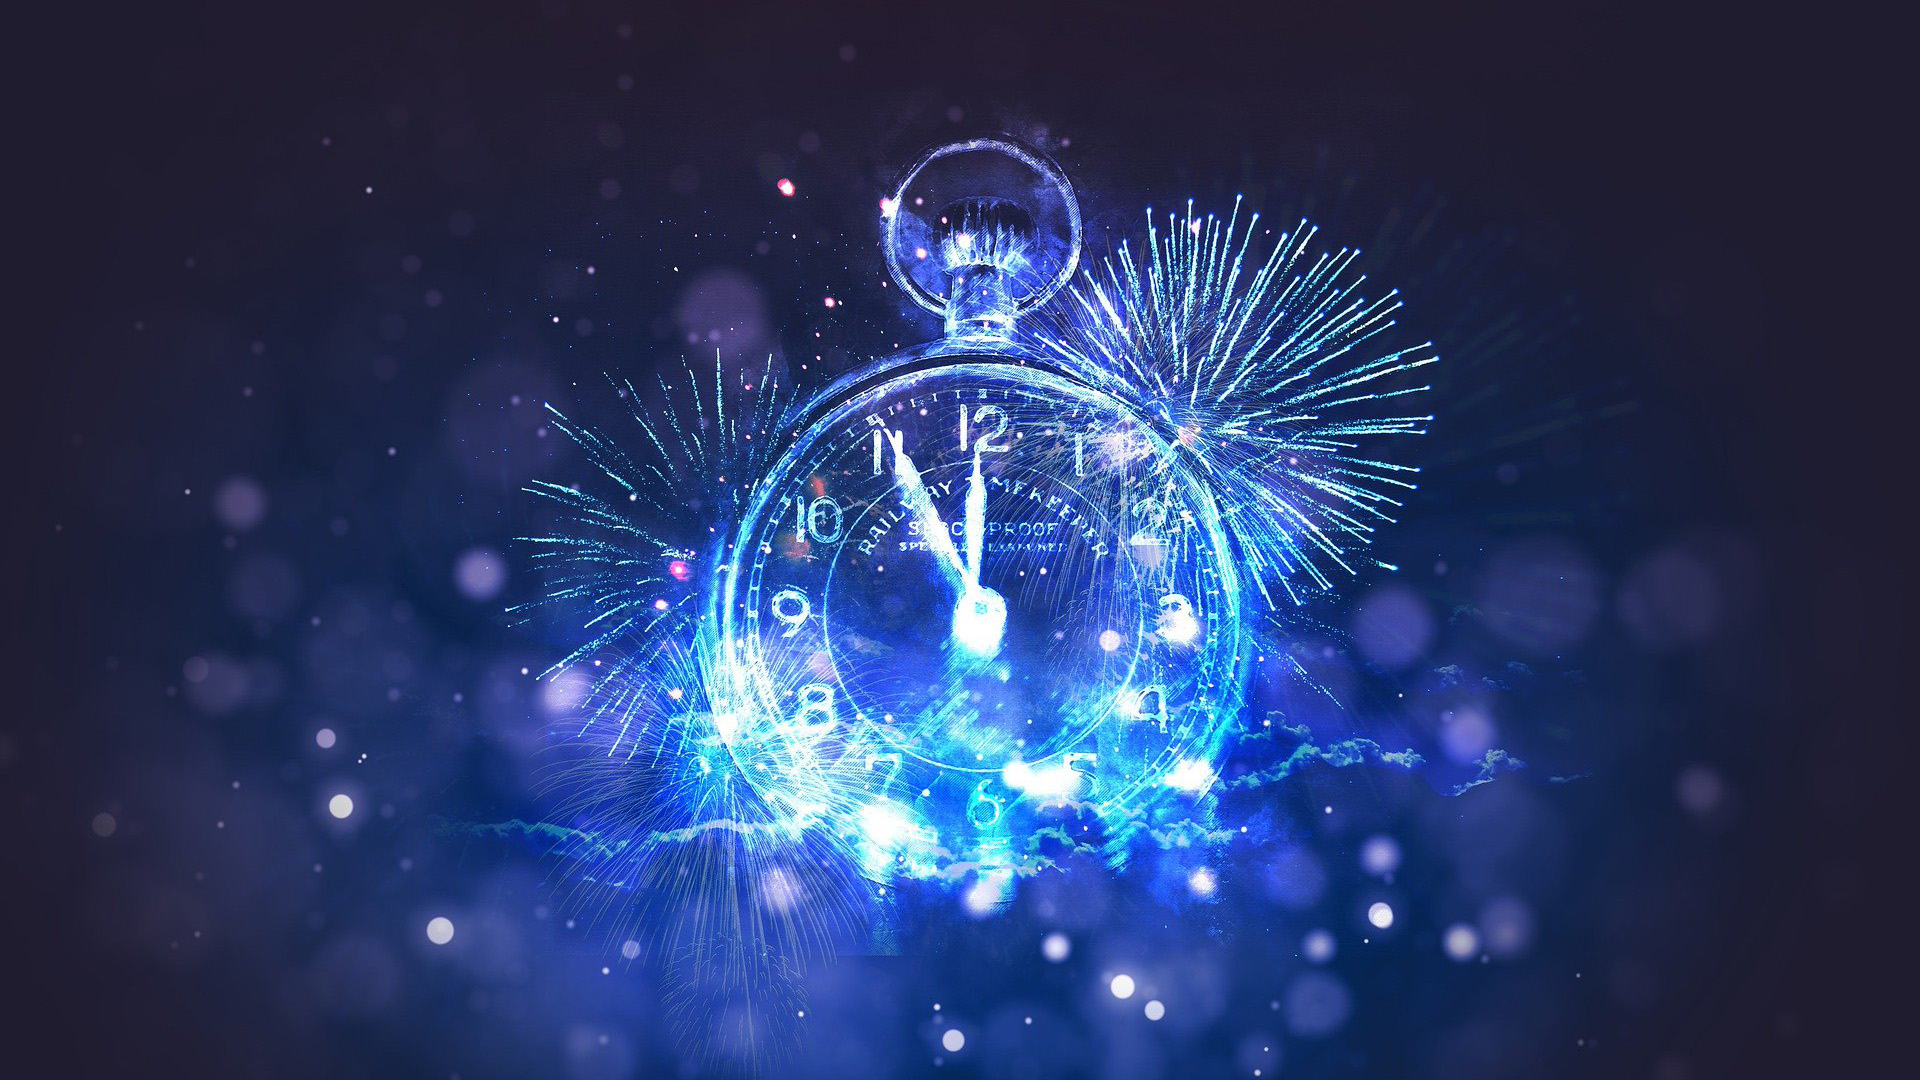 In the graphic there is a light blue background that is made up of gradients, fireworks, and lights. In the center of the graphic there is a stop watch looking clock which is about to strike midnight!